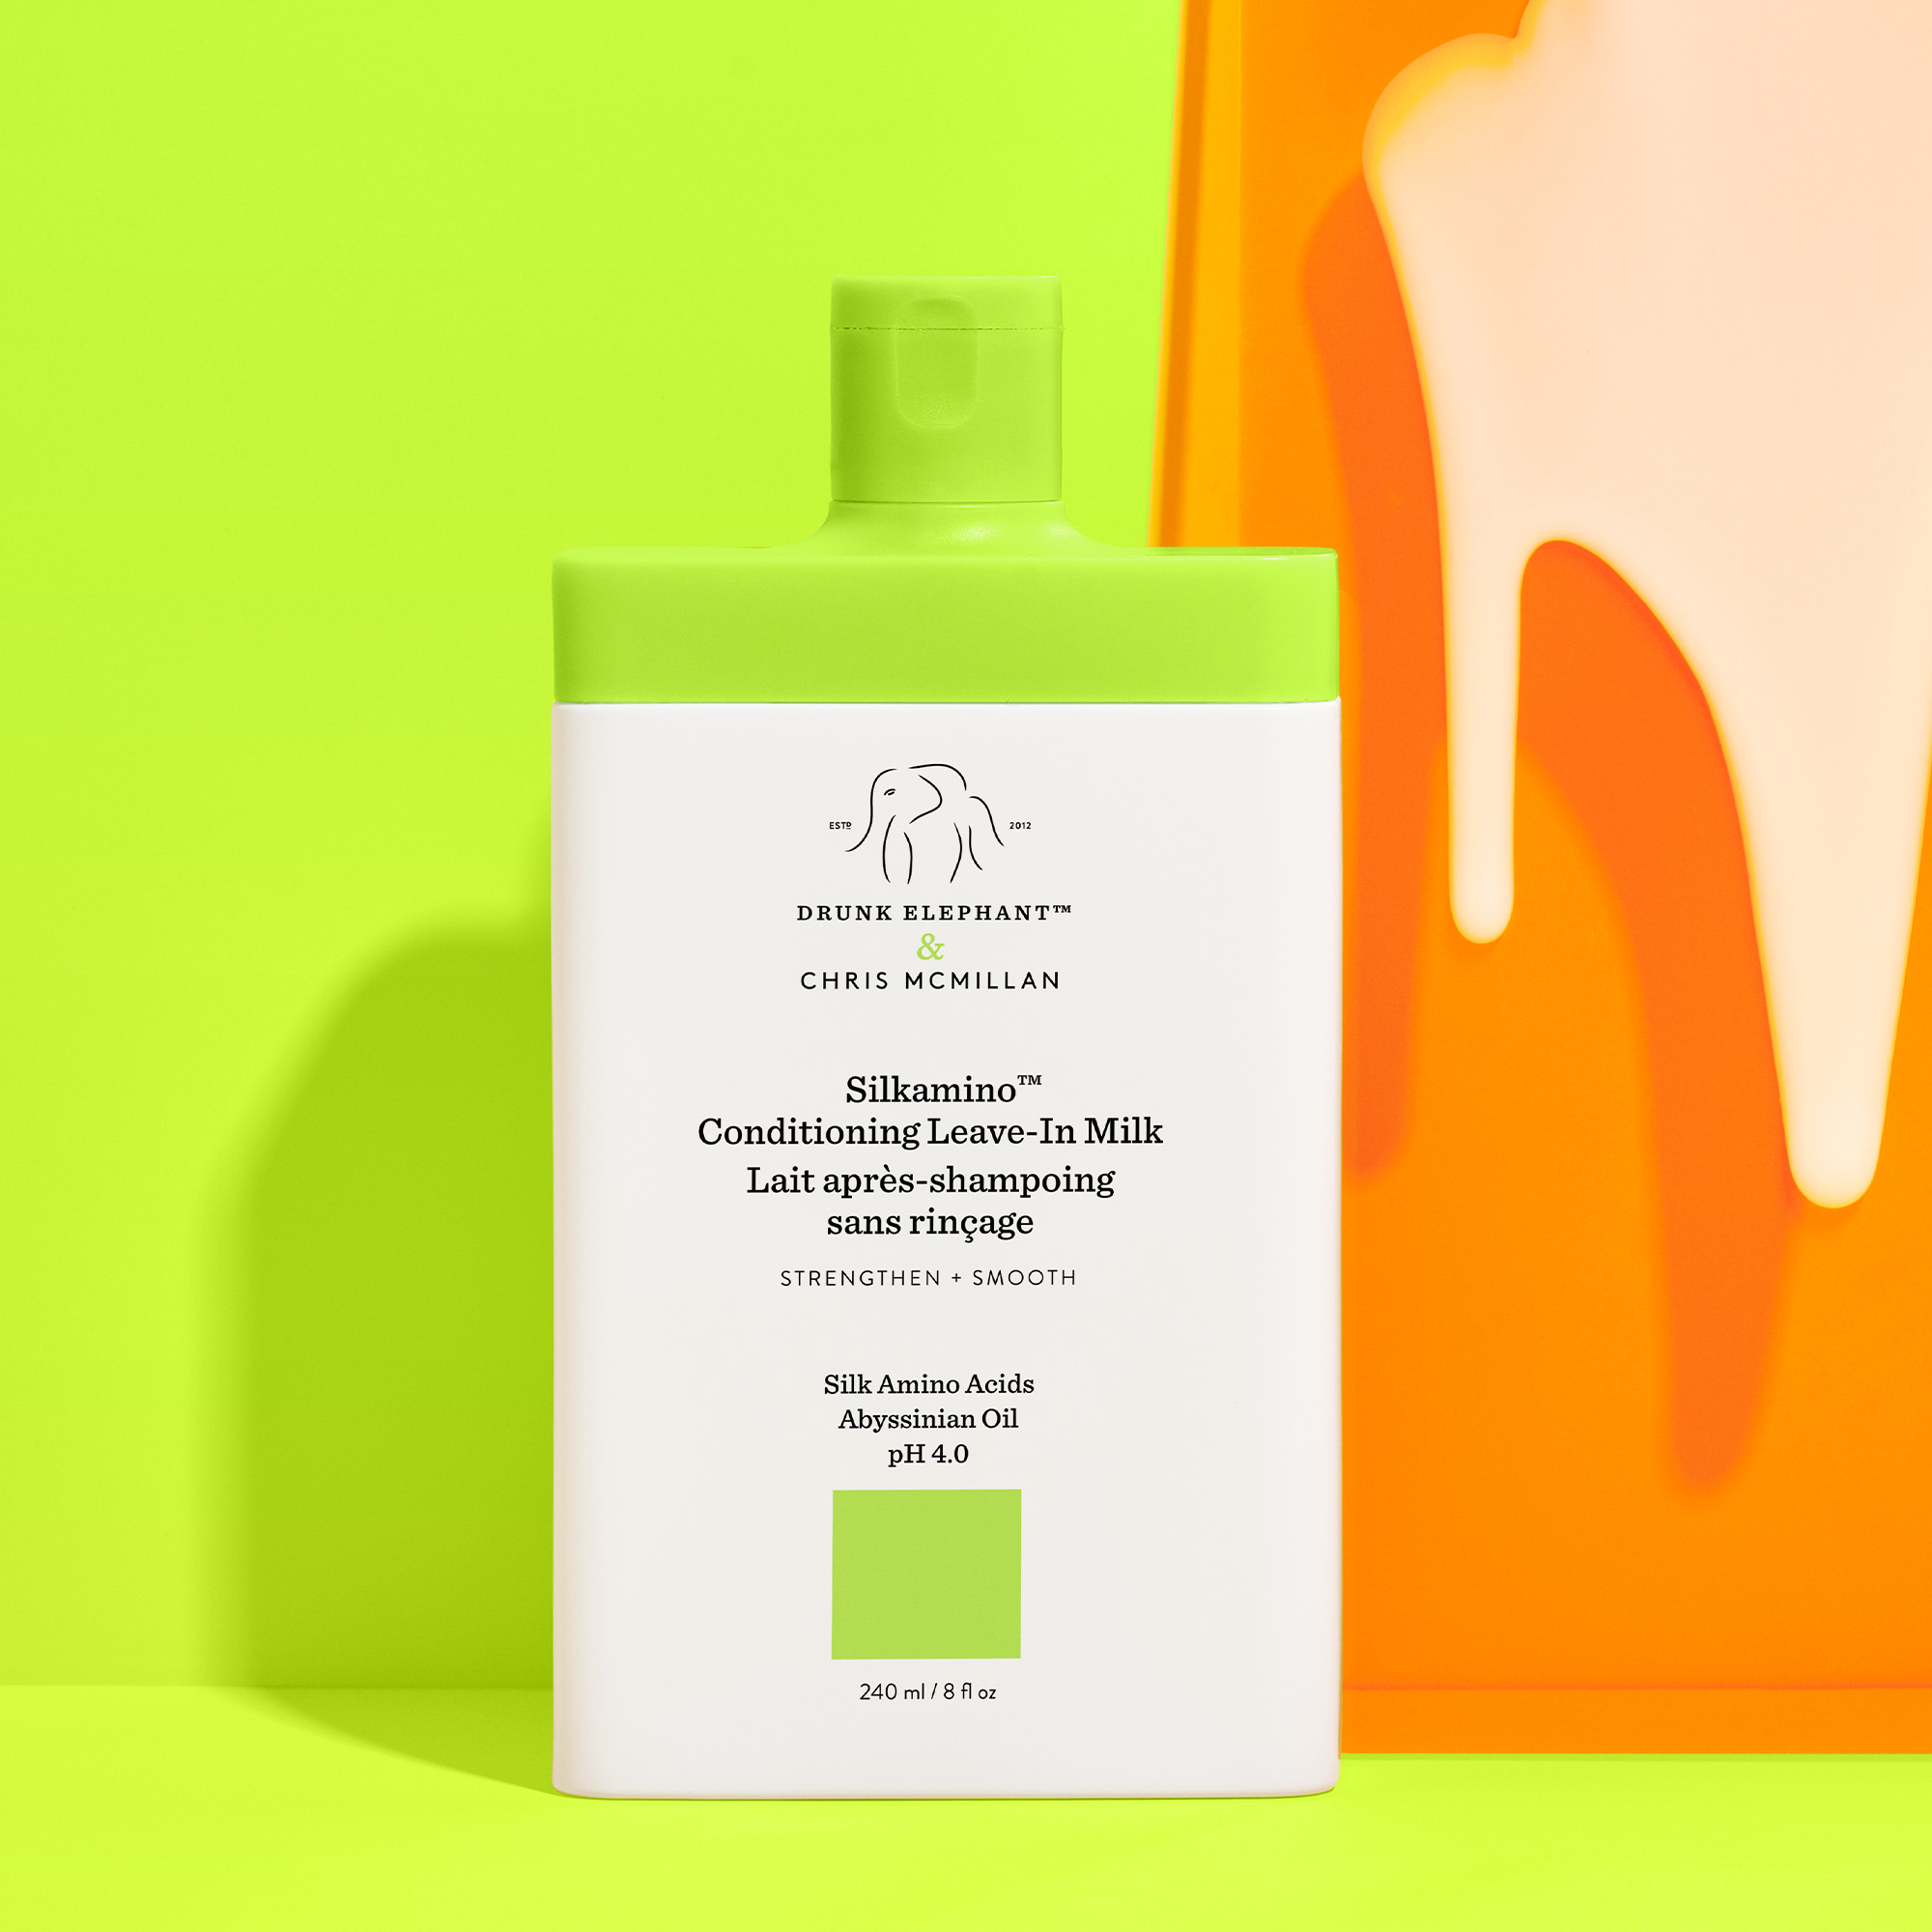 Drunk Elephant Silkamino™ Conditioning Leave-In Milk (lait sans rinçage) |  Space NK